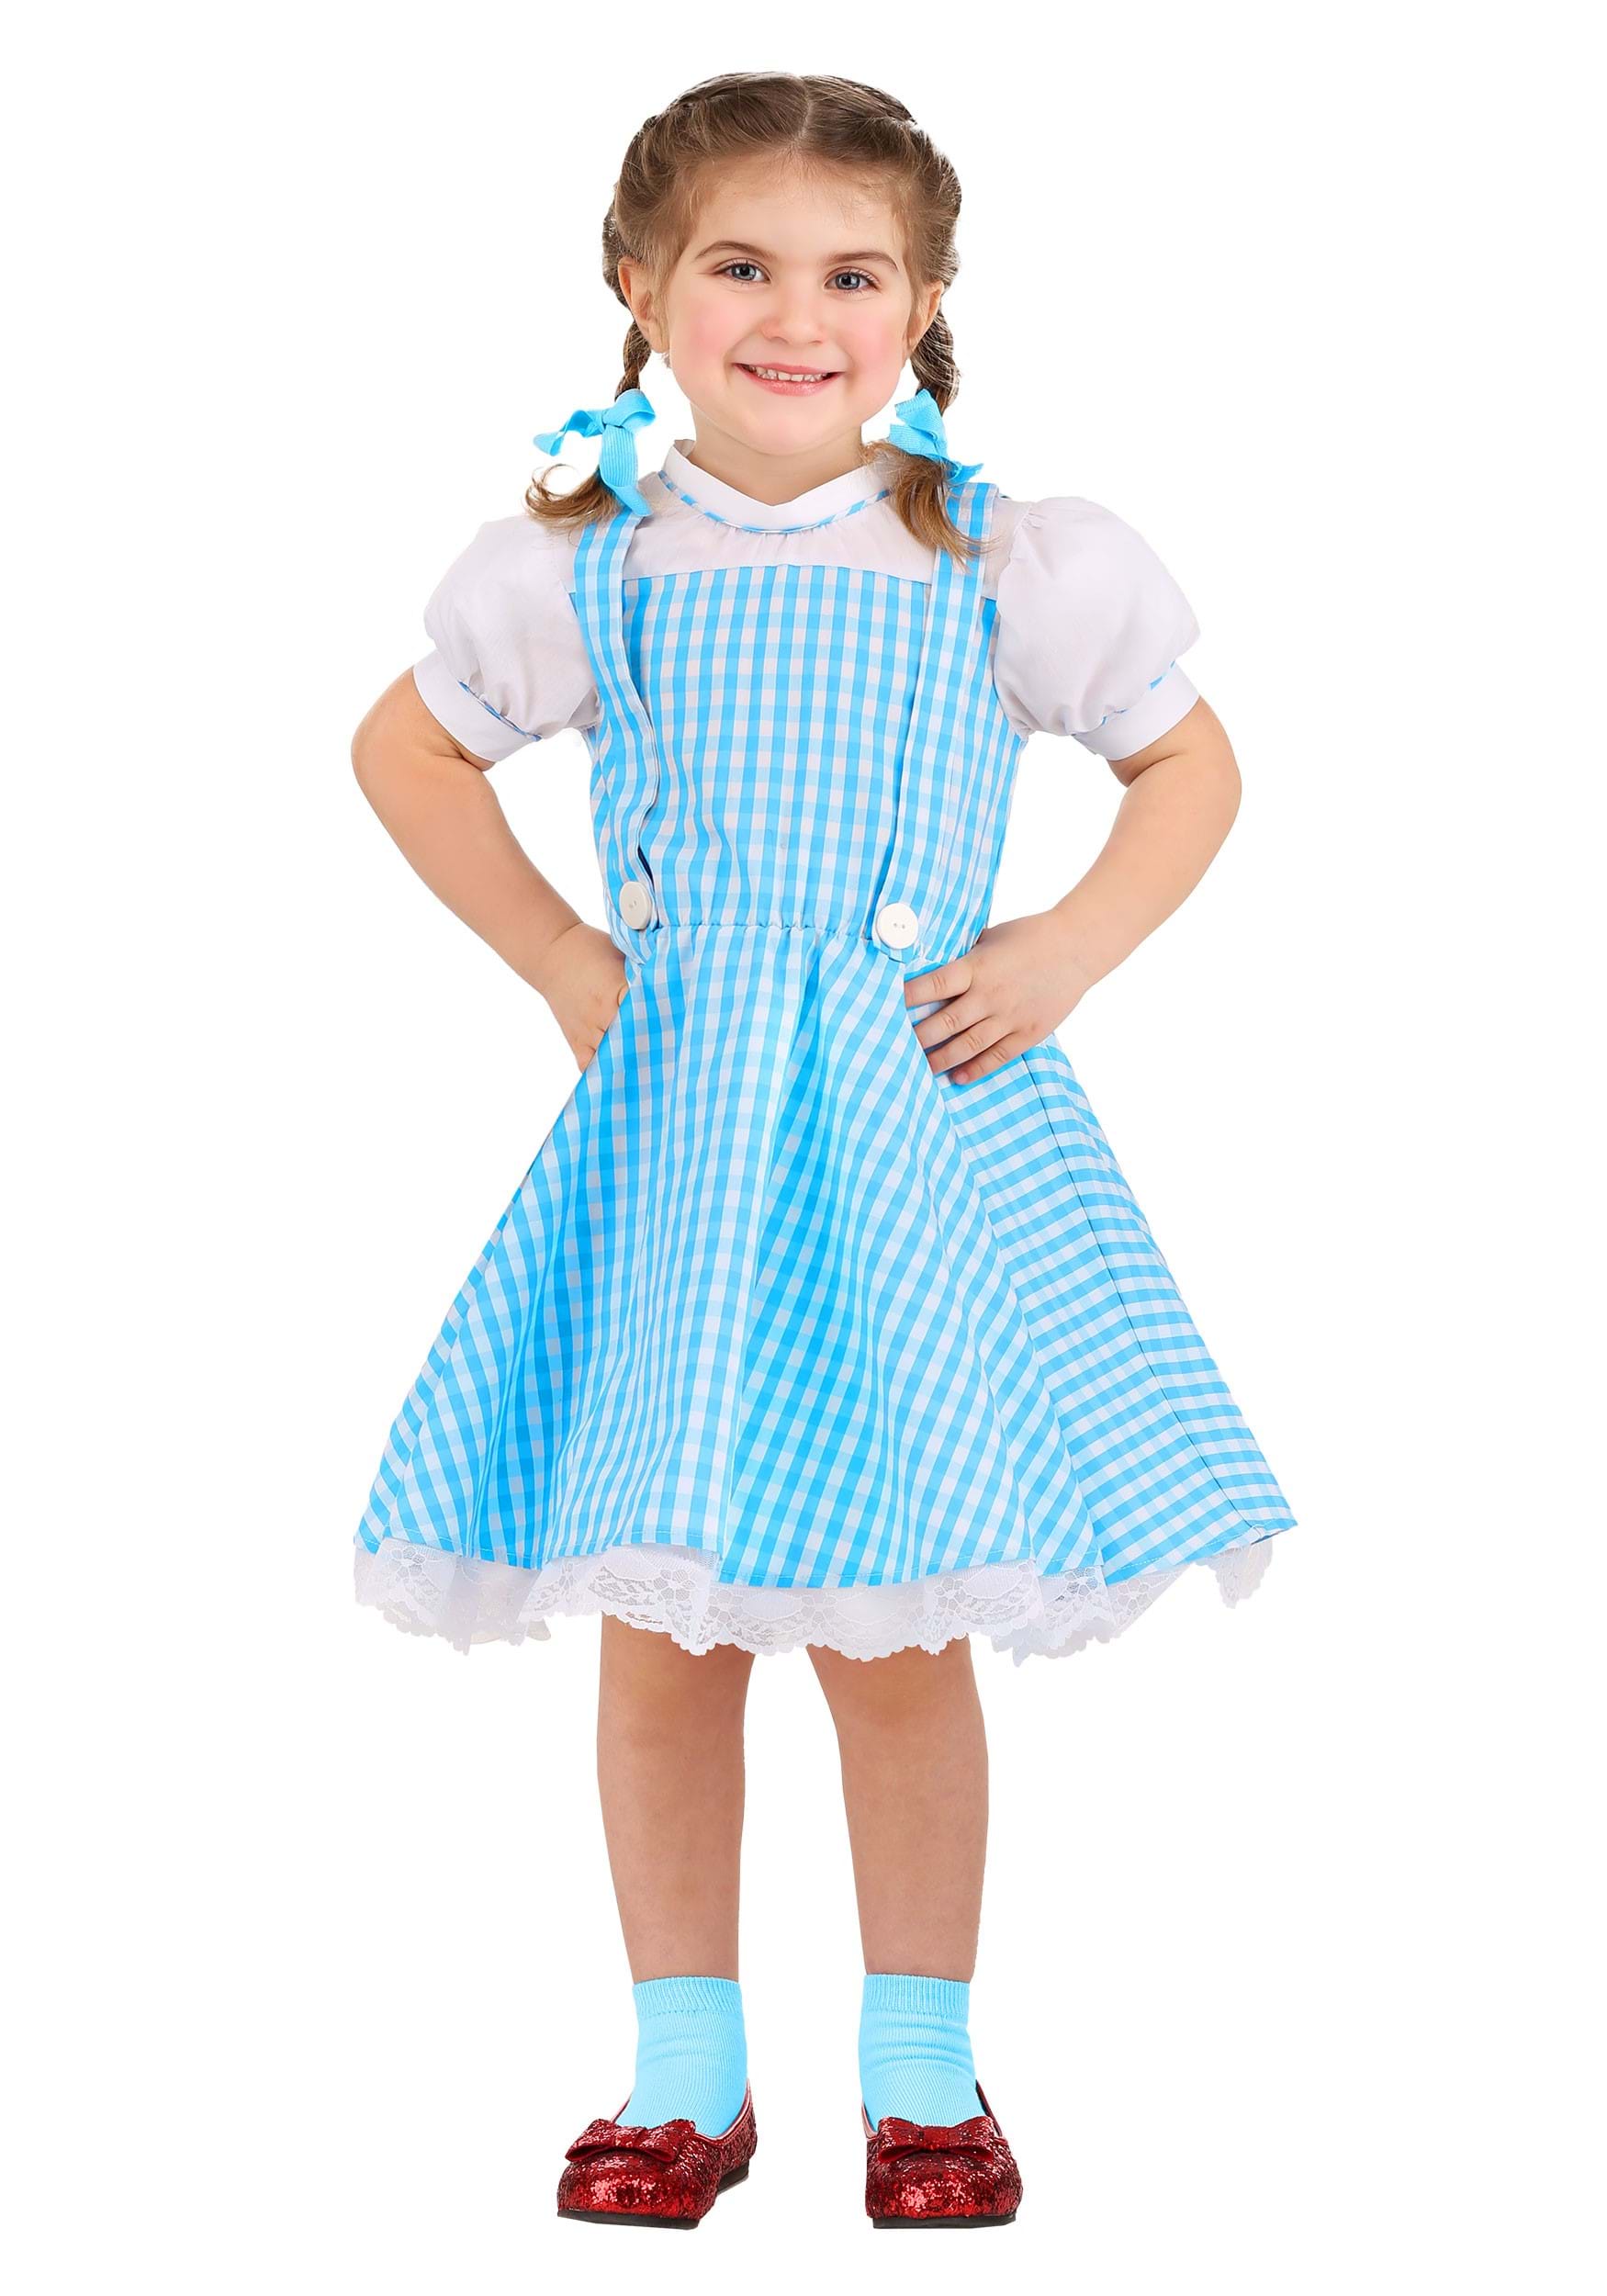 Photos - Fancy Dress Classic FUN Costumes  Dorothy Wizard of Oz Costume for Toddlers | Dorothy C 